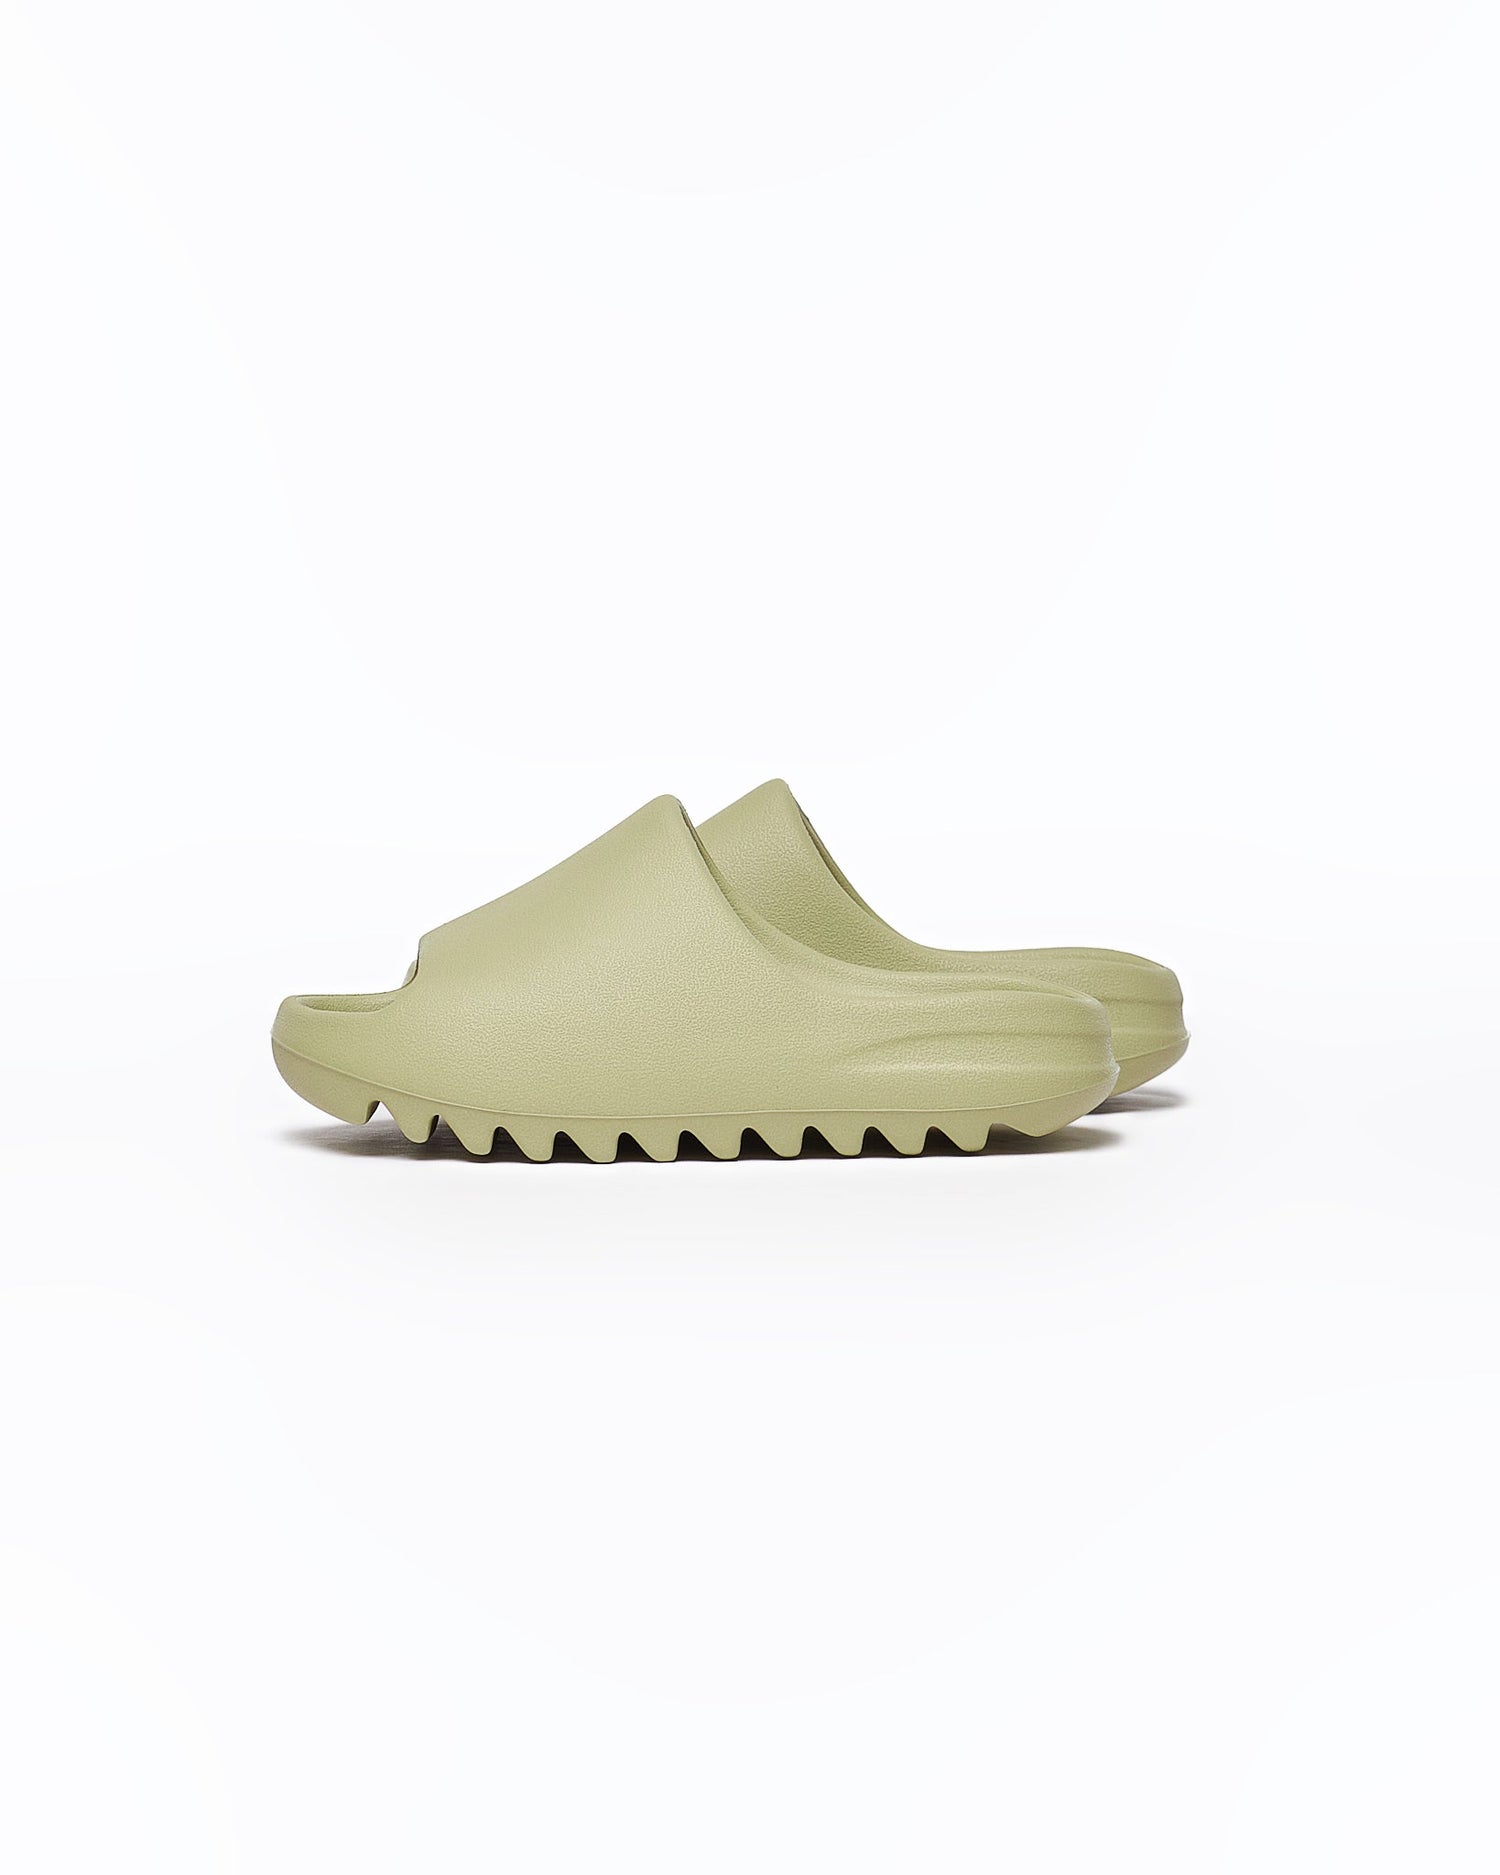 MOI OUTFIT-ADI Yeezy Lady Light Green Slide 38.90